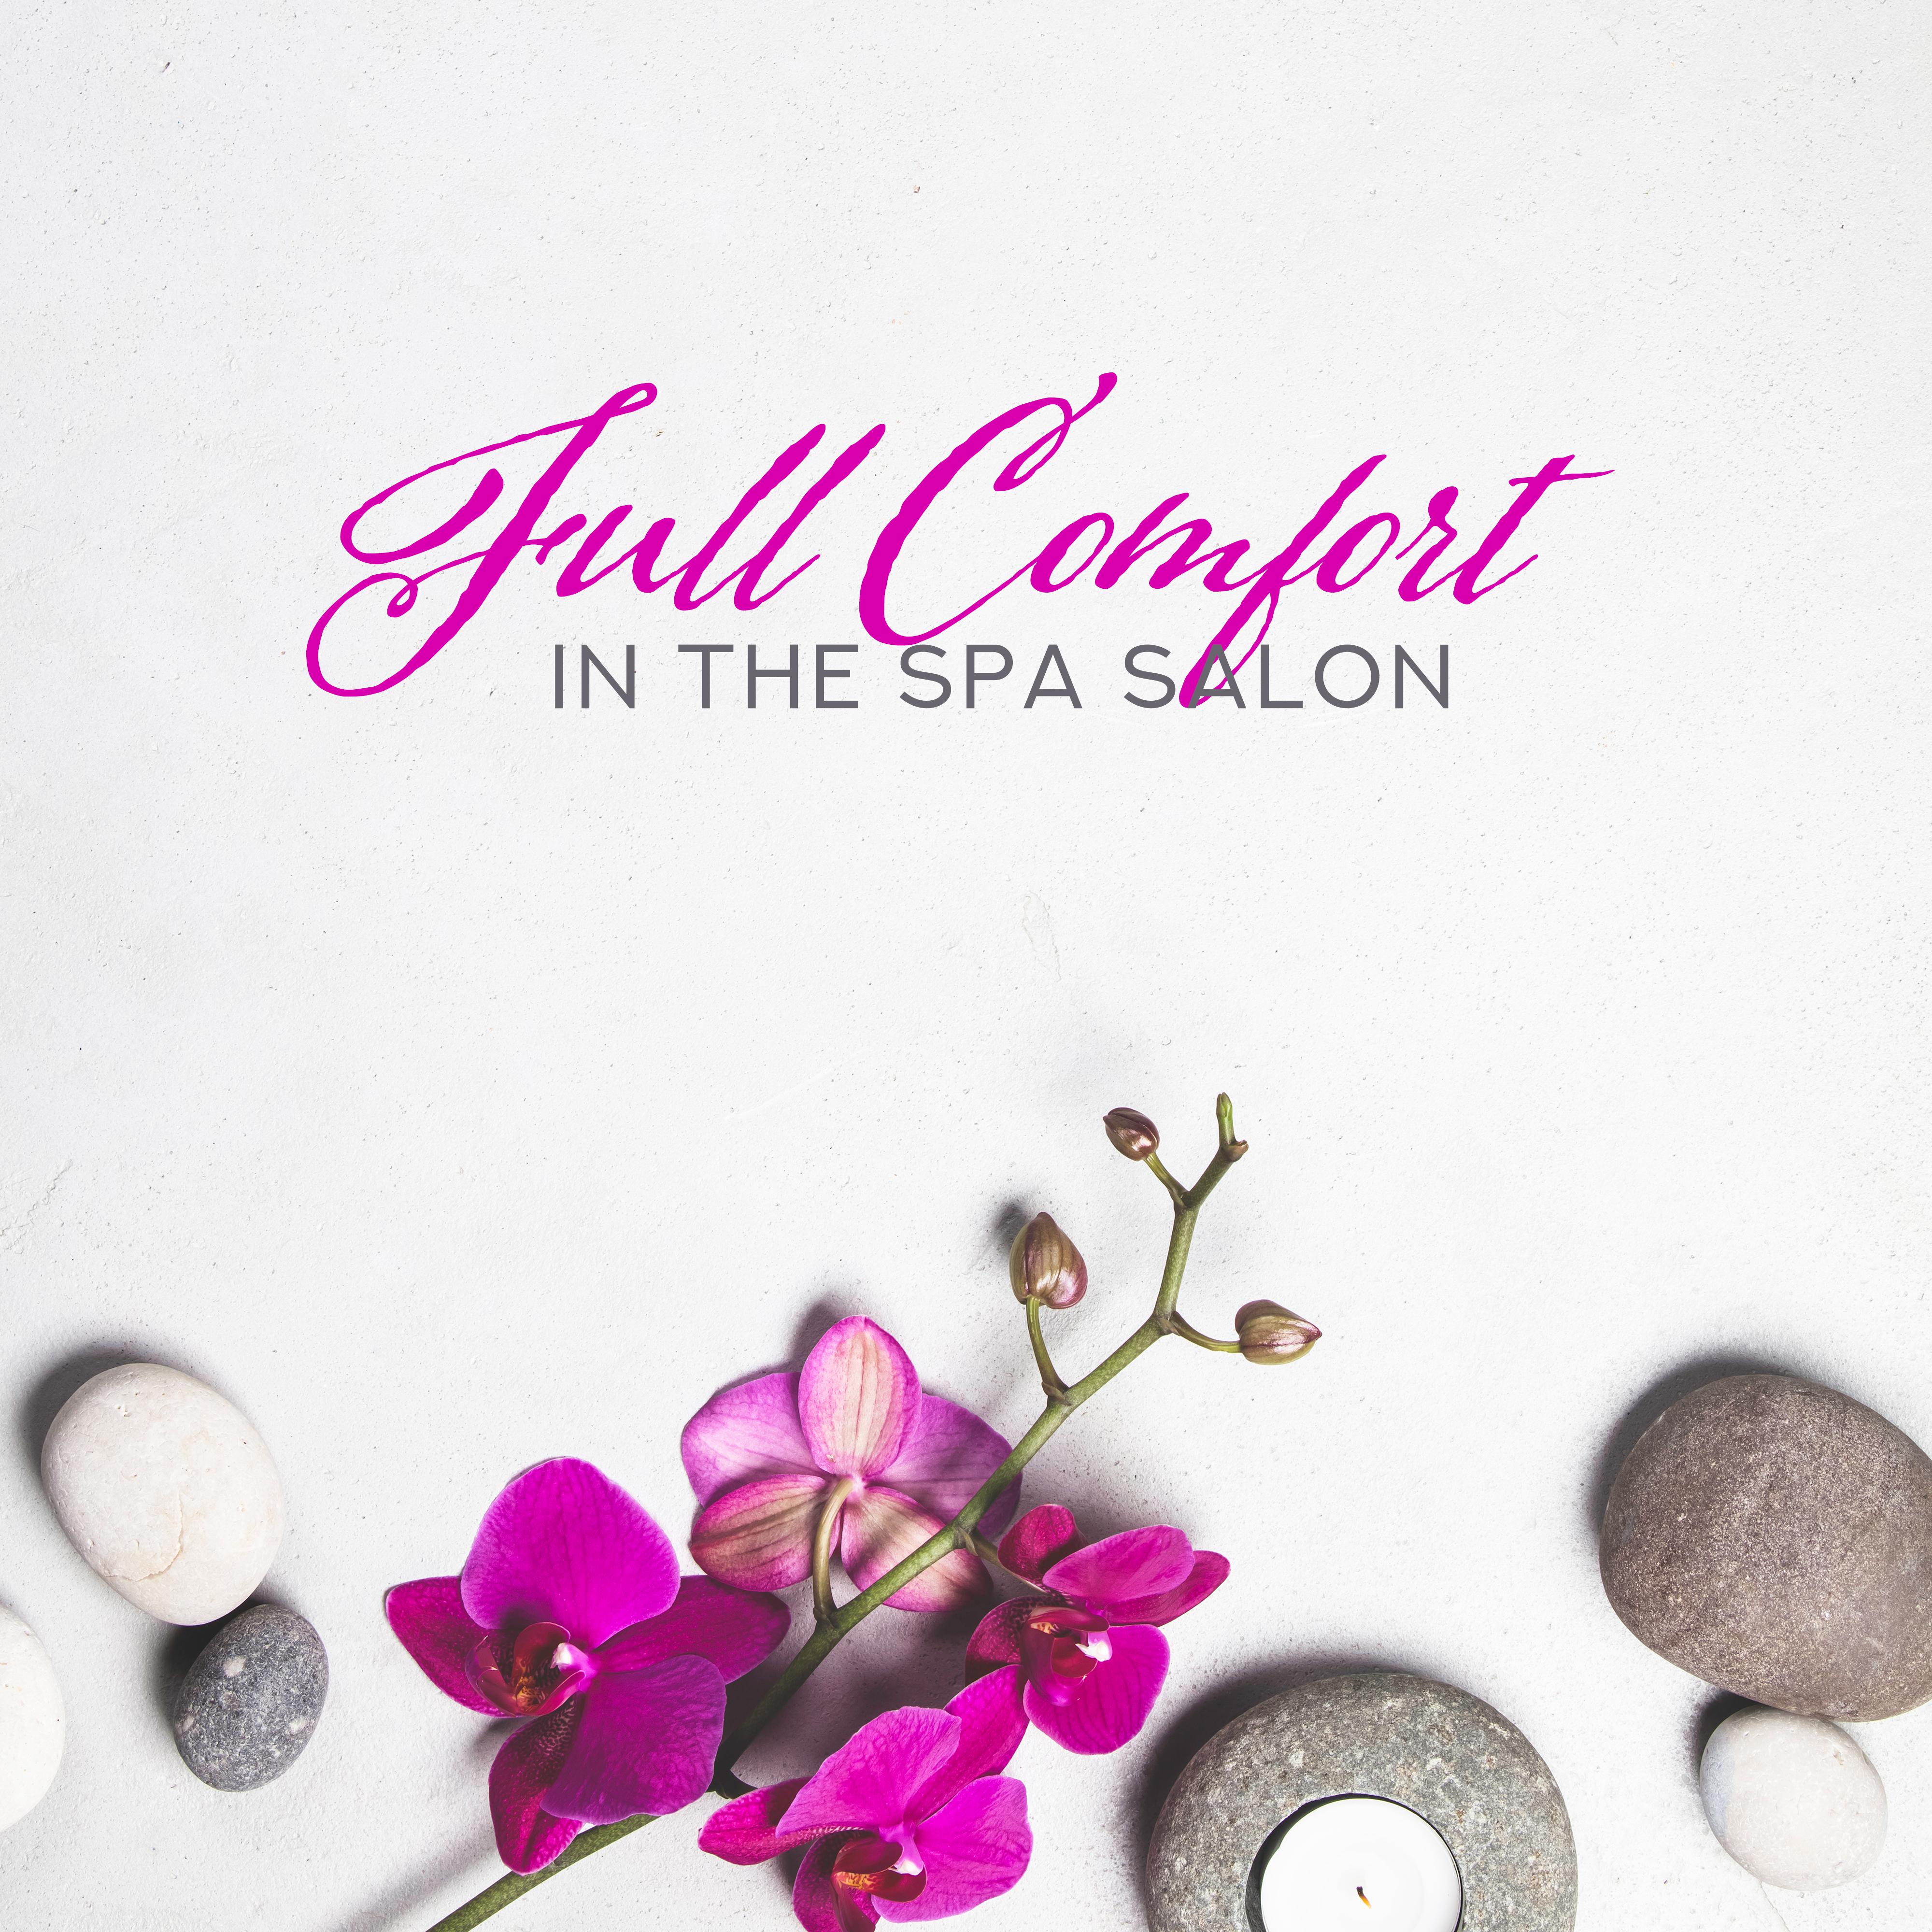 Full Comfort in the Spa Salon: Compilation of Most Relaxing Nature New Age Music for Spa & Wellness, Massage Session, Sauna, Bath, Aromatherapy